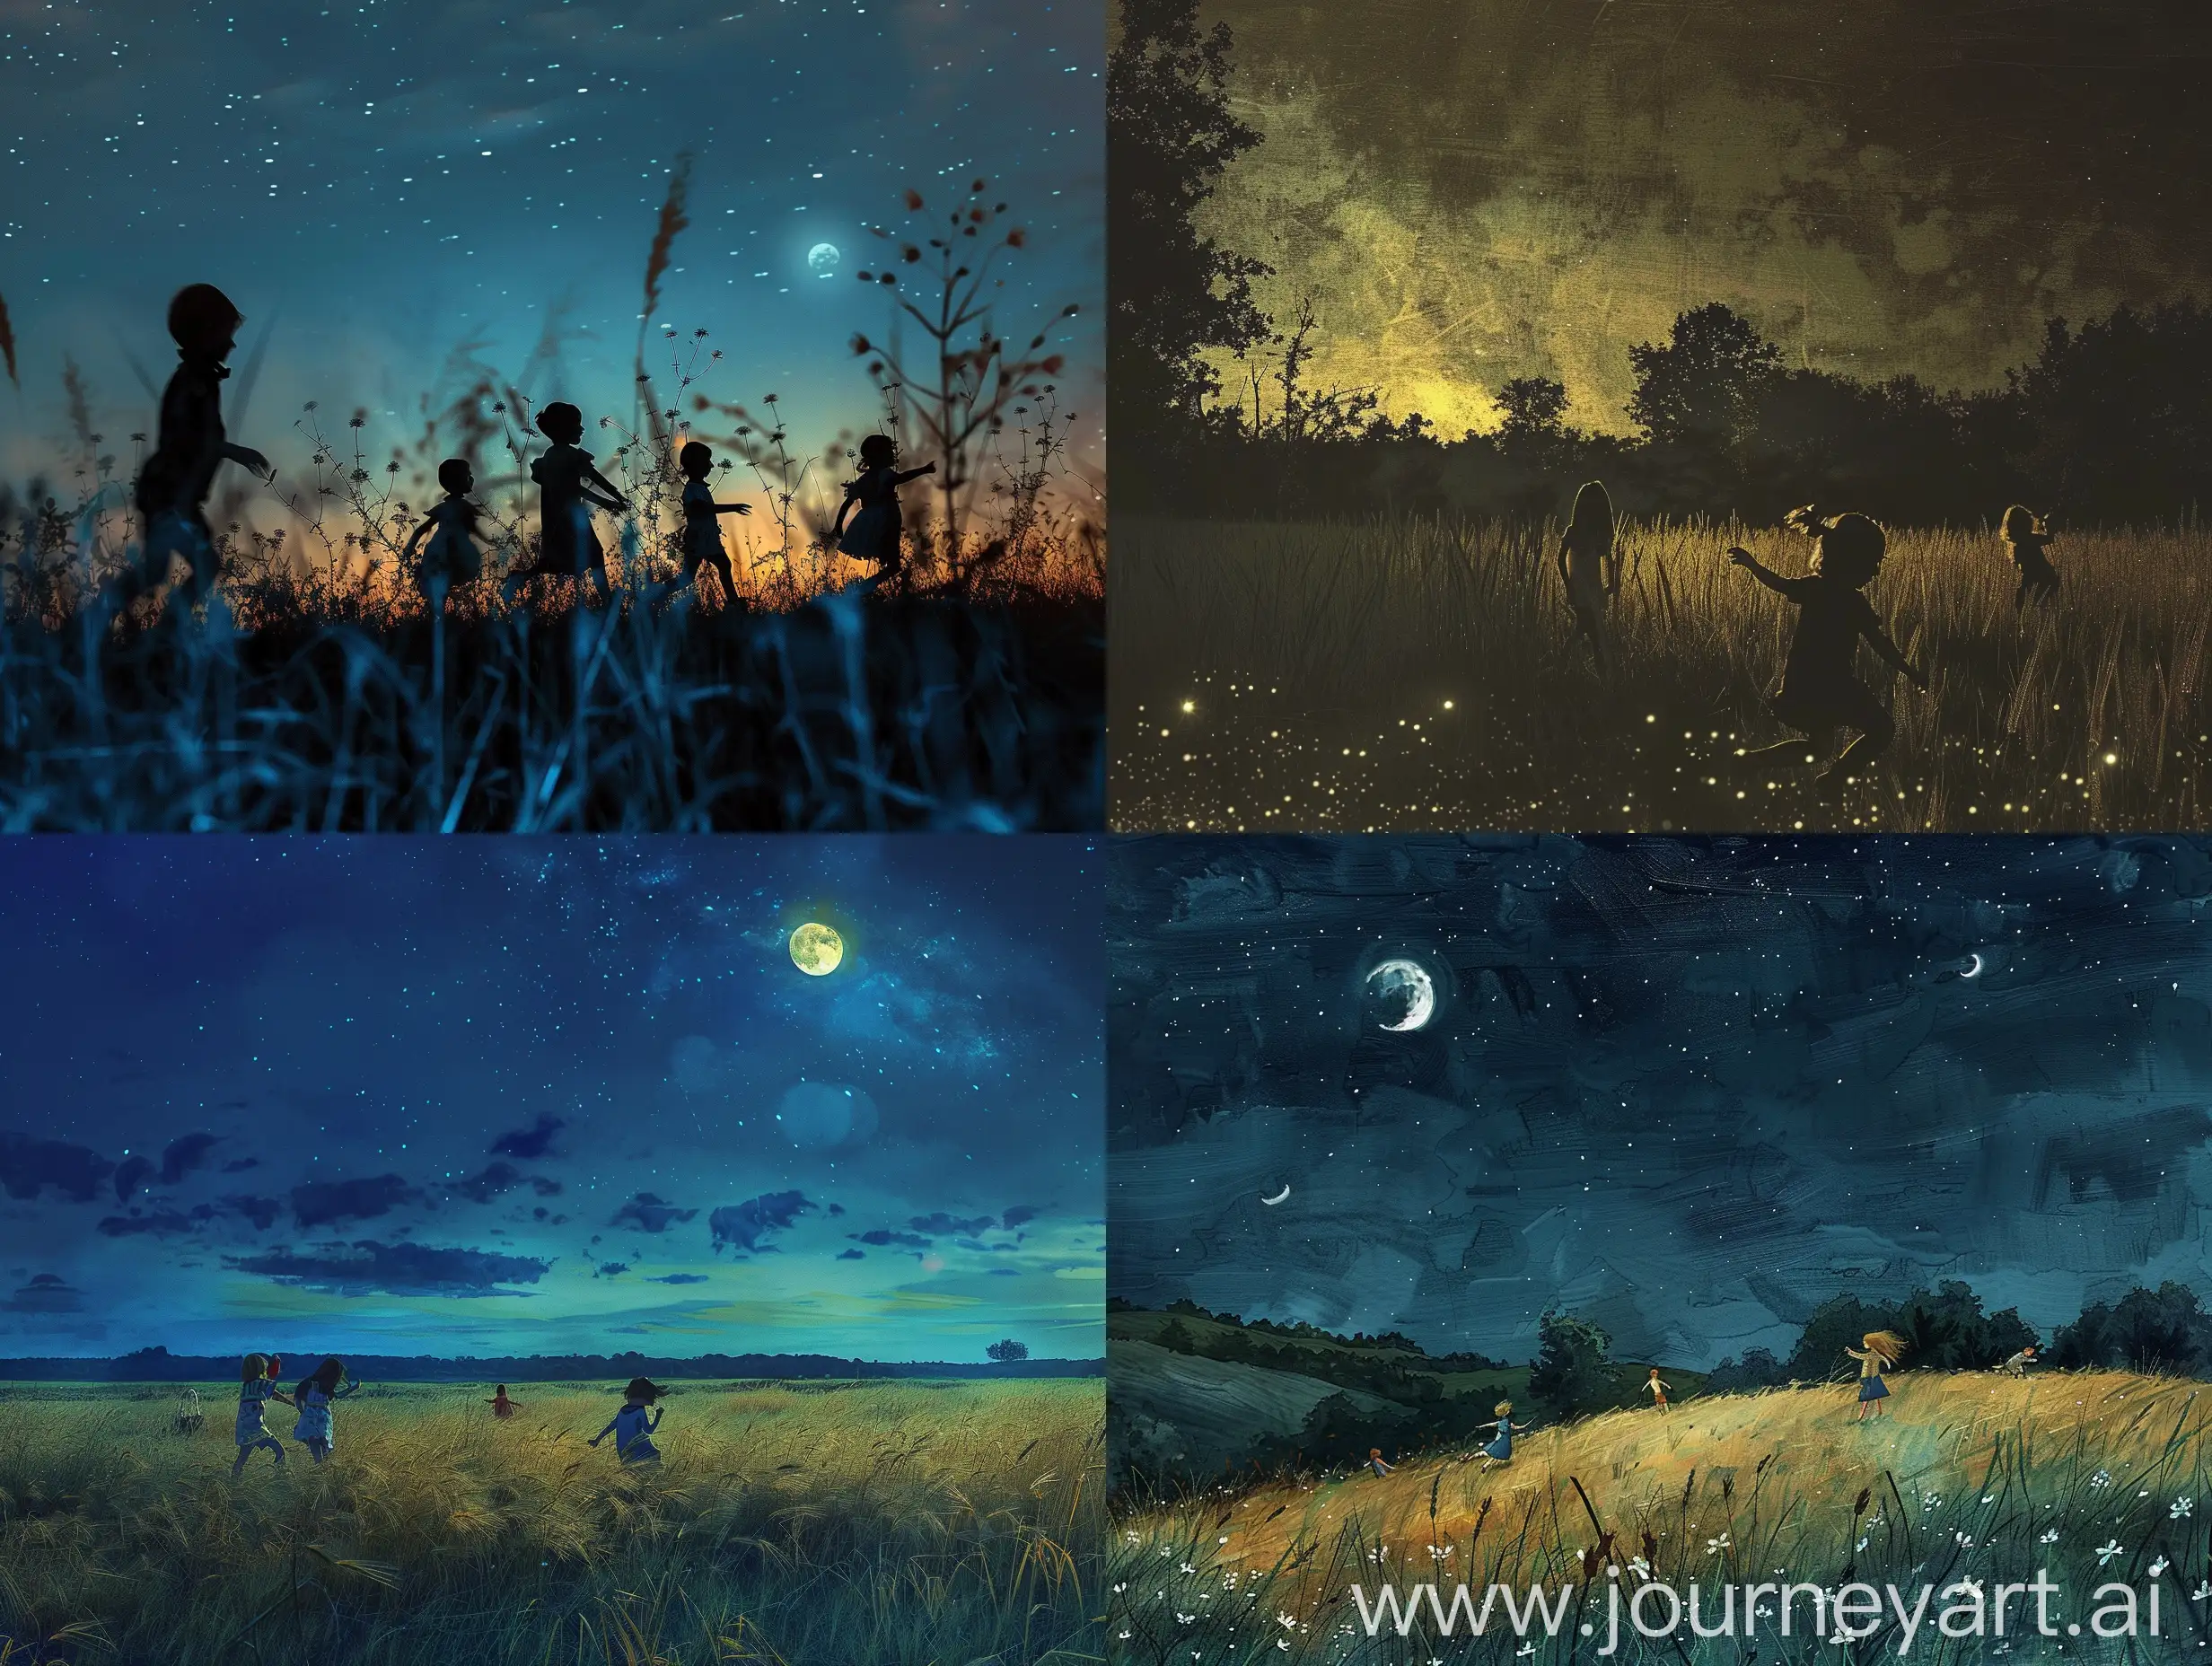 create images of fields with children playing at night